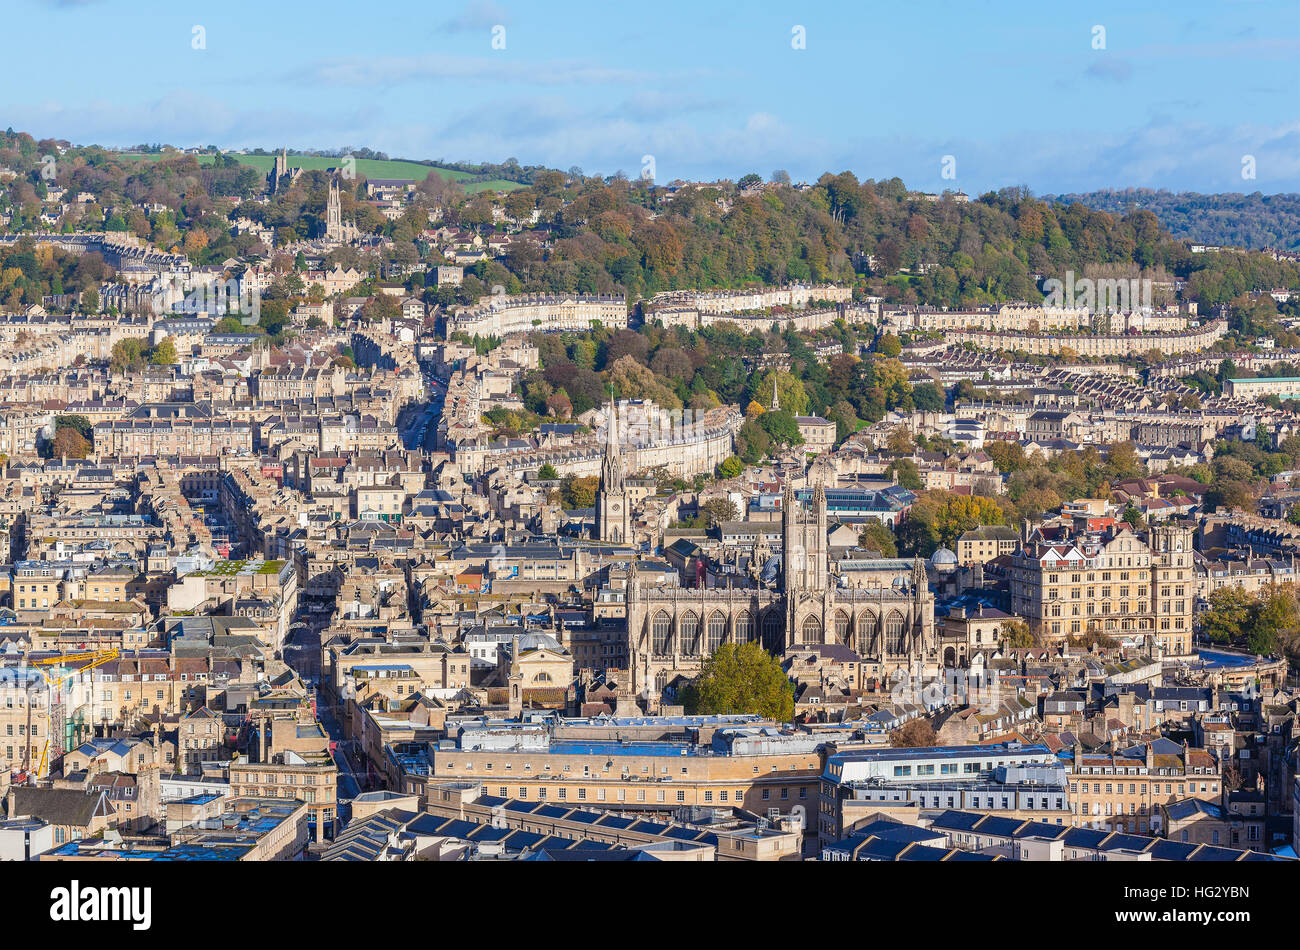 Skyline of the city of Bath, an UNESCO World Heritage Site Stock Photo